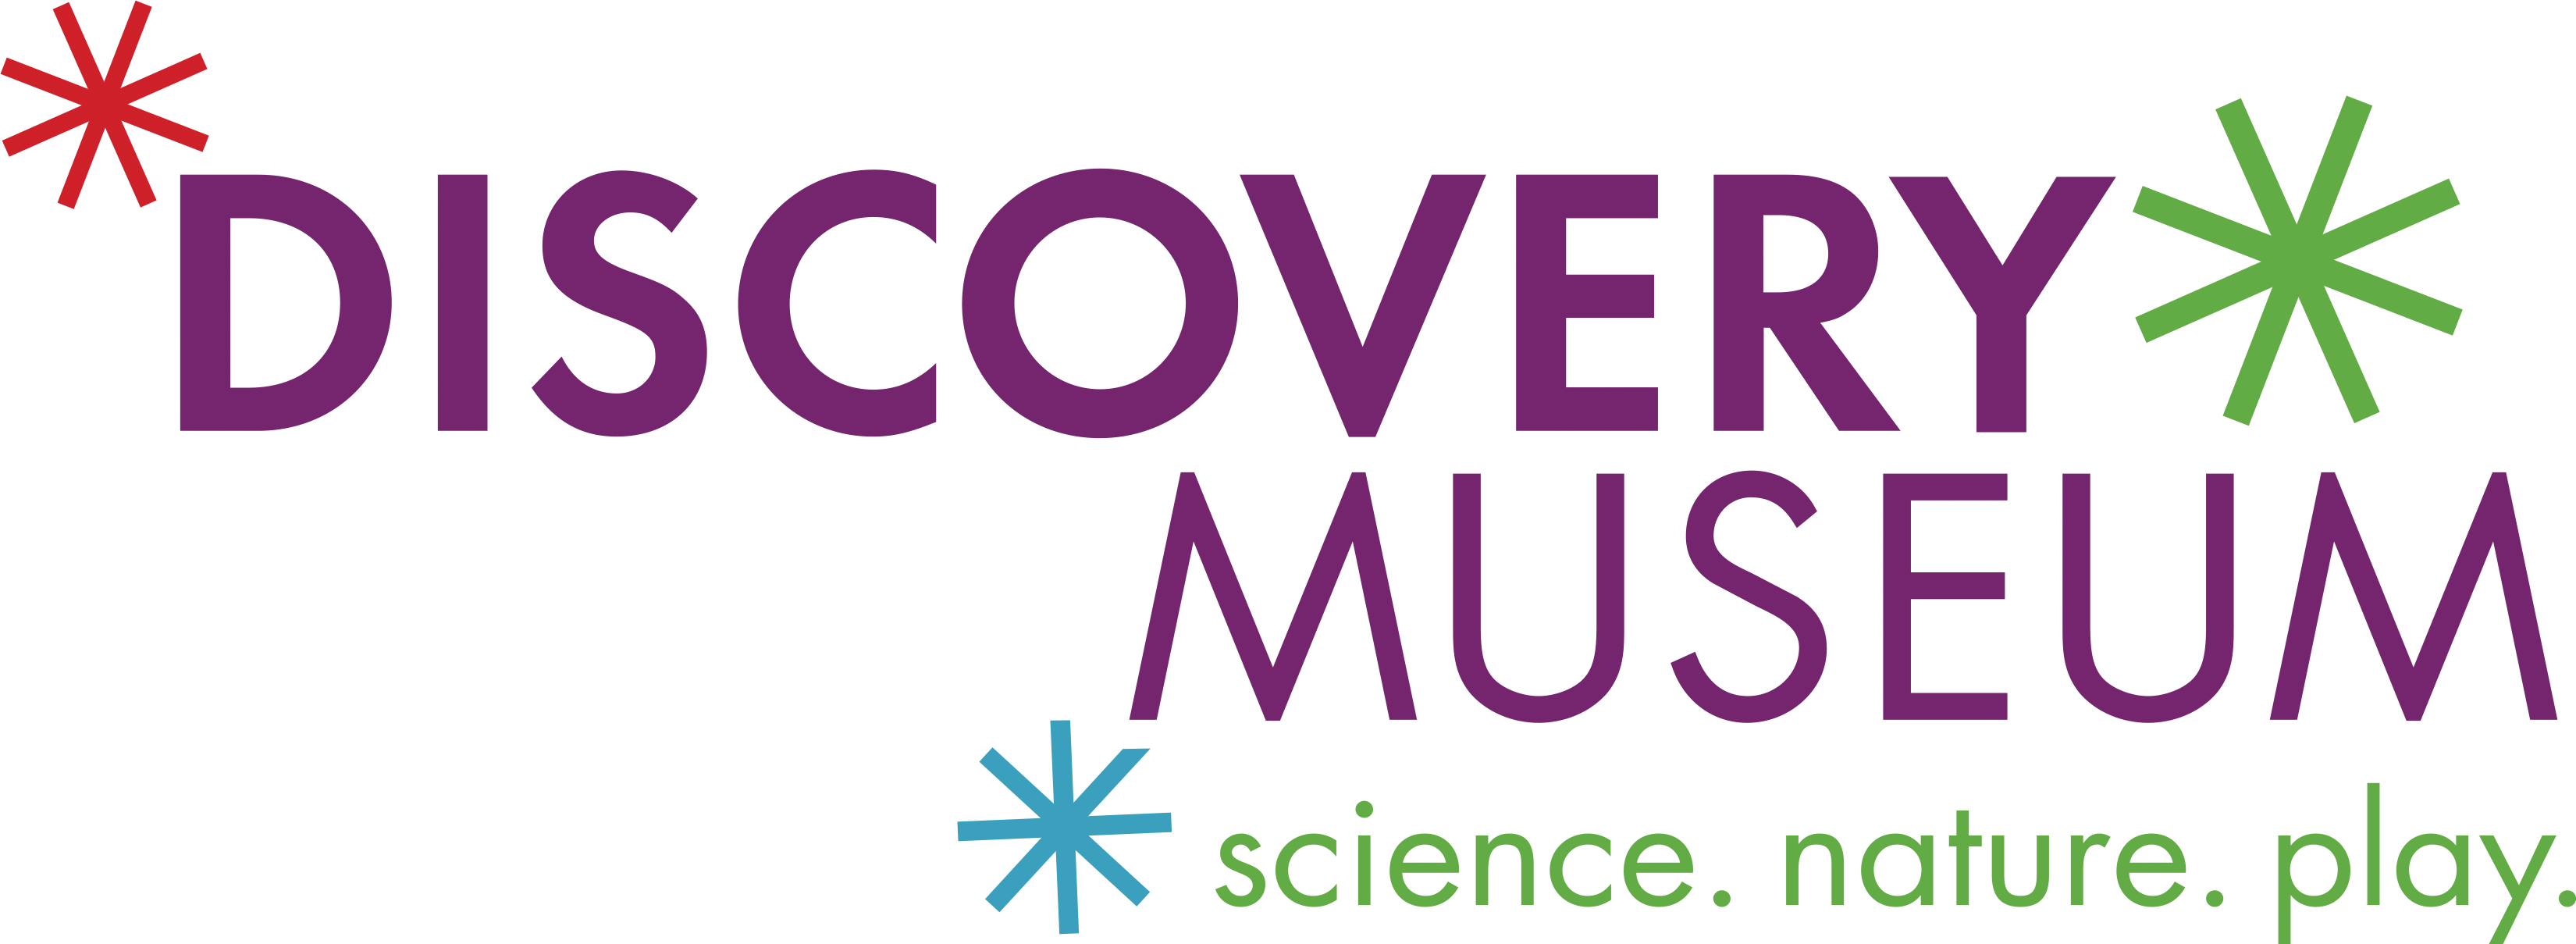 Discovery Museum, Science, Nature, Play